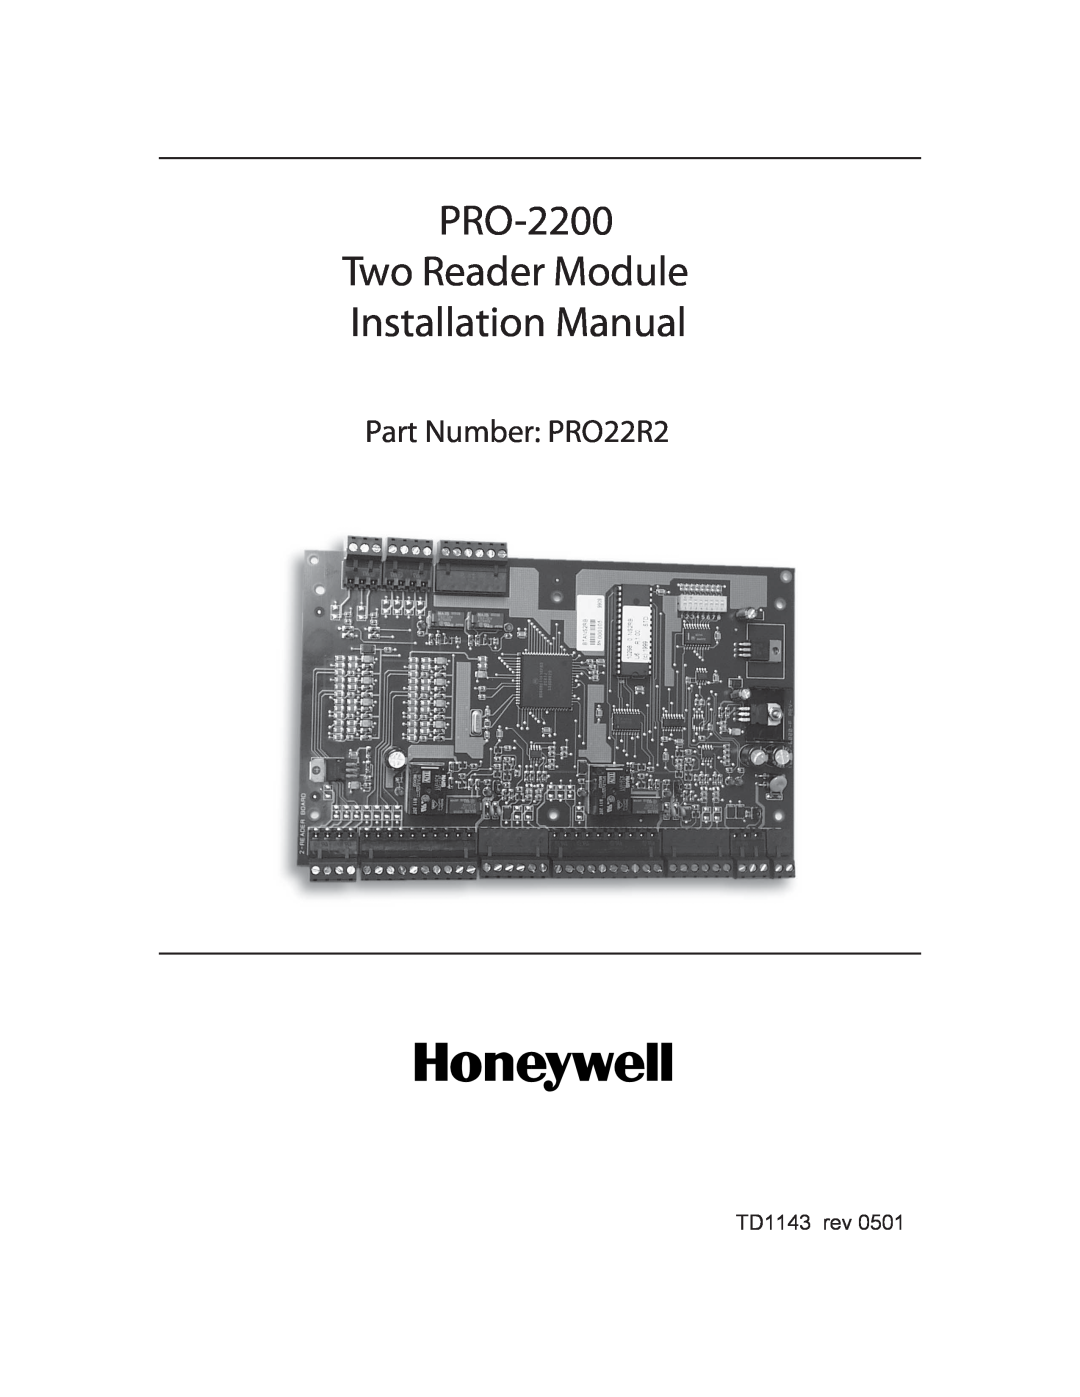 Honeywell installation manual Part Number PRO22E1PS, PRO-2200 Power Supply With Battery Backup, Installation Manual 